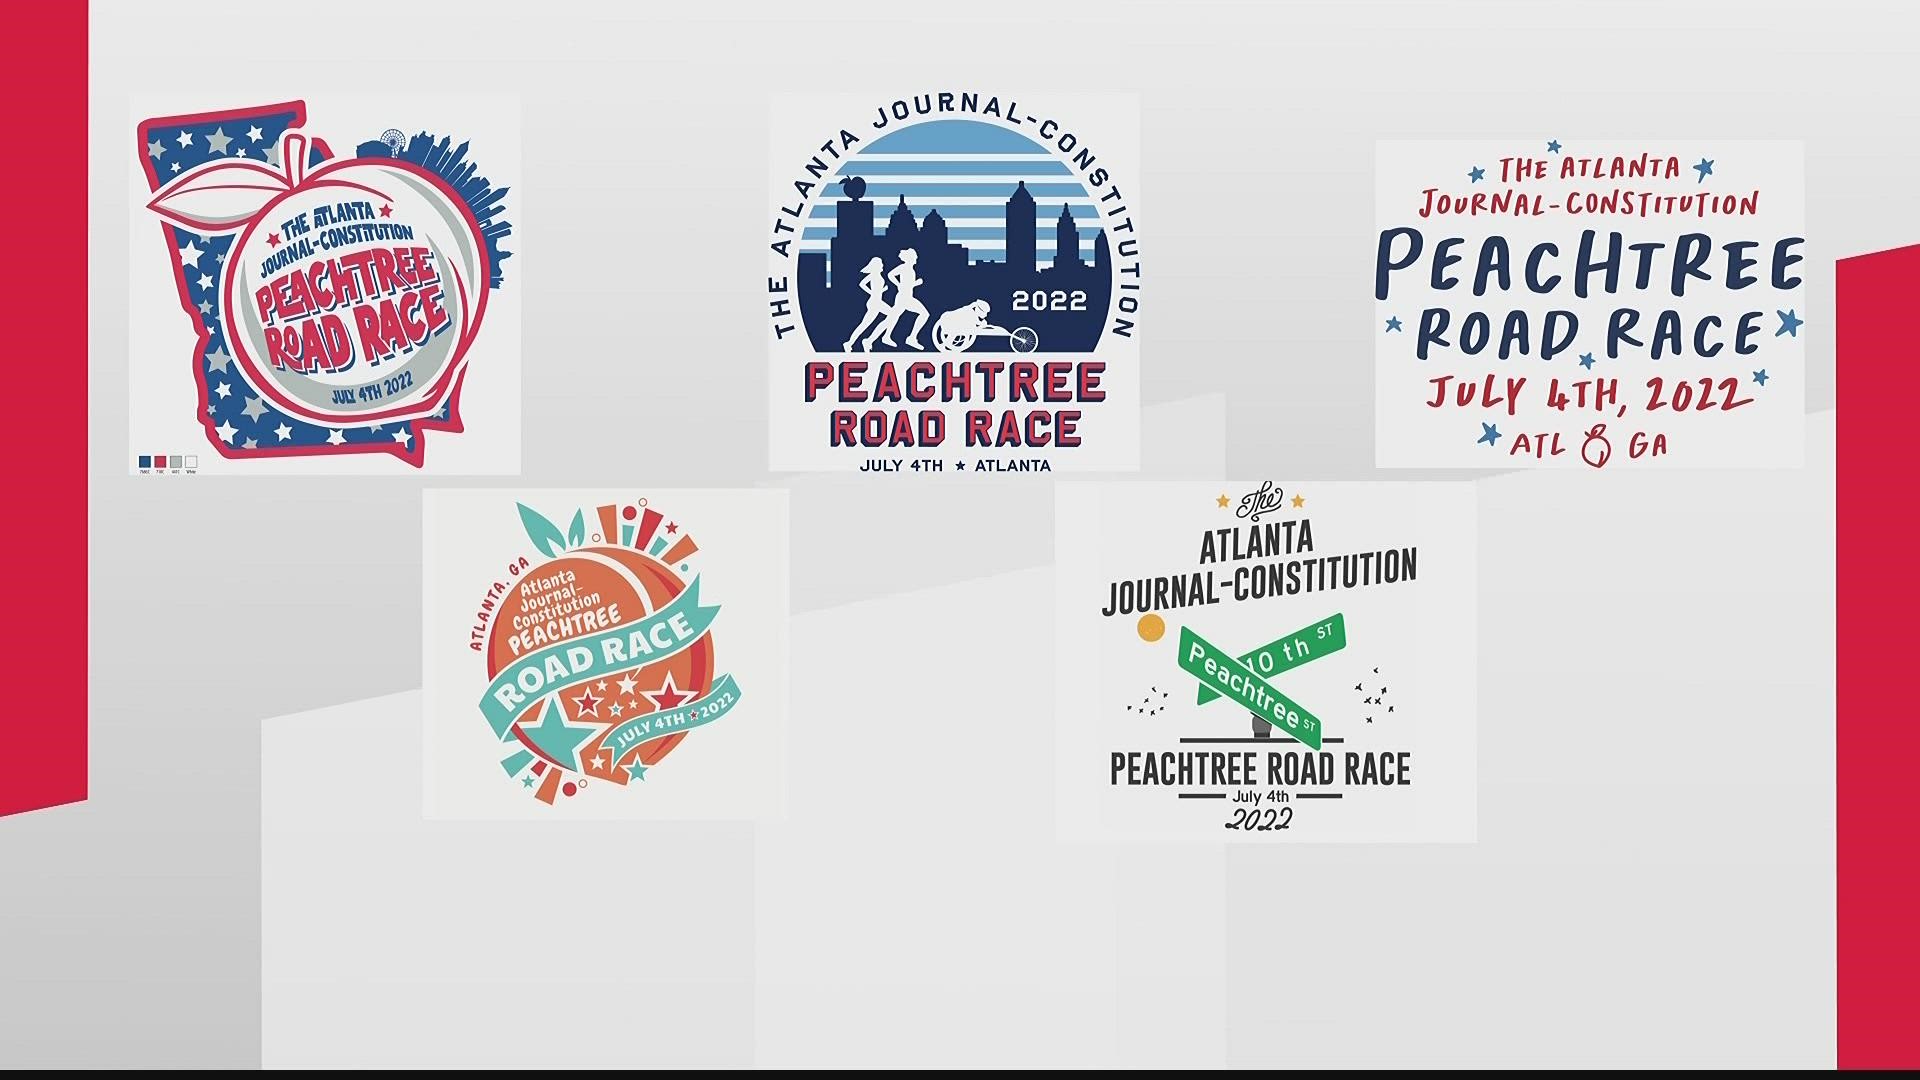 It's one of the most anticipated parts of the AJC Peachtree Road Race.